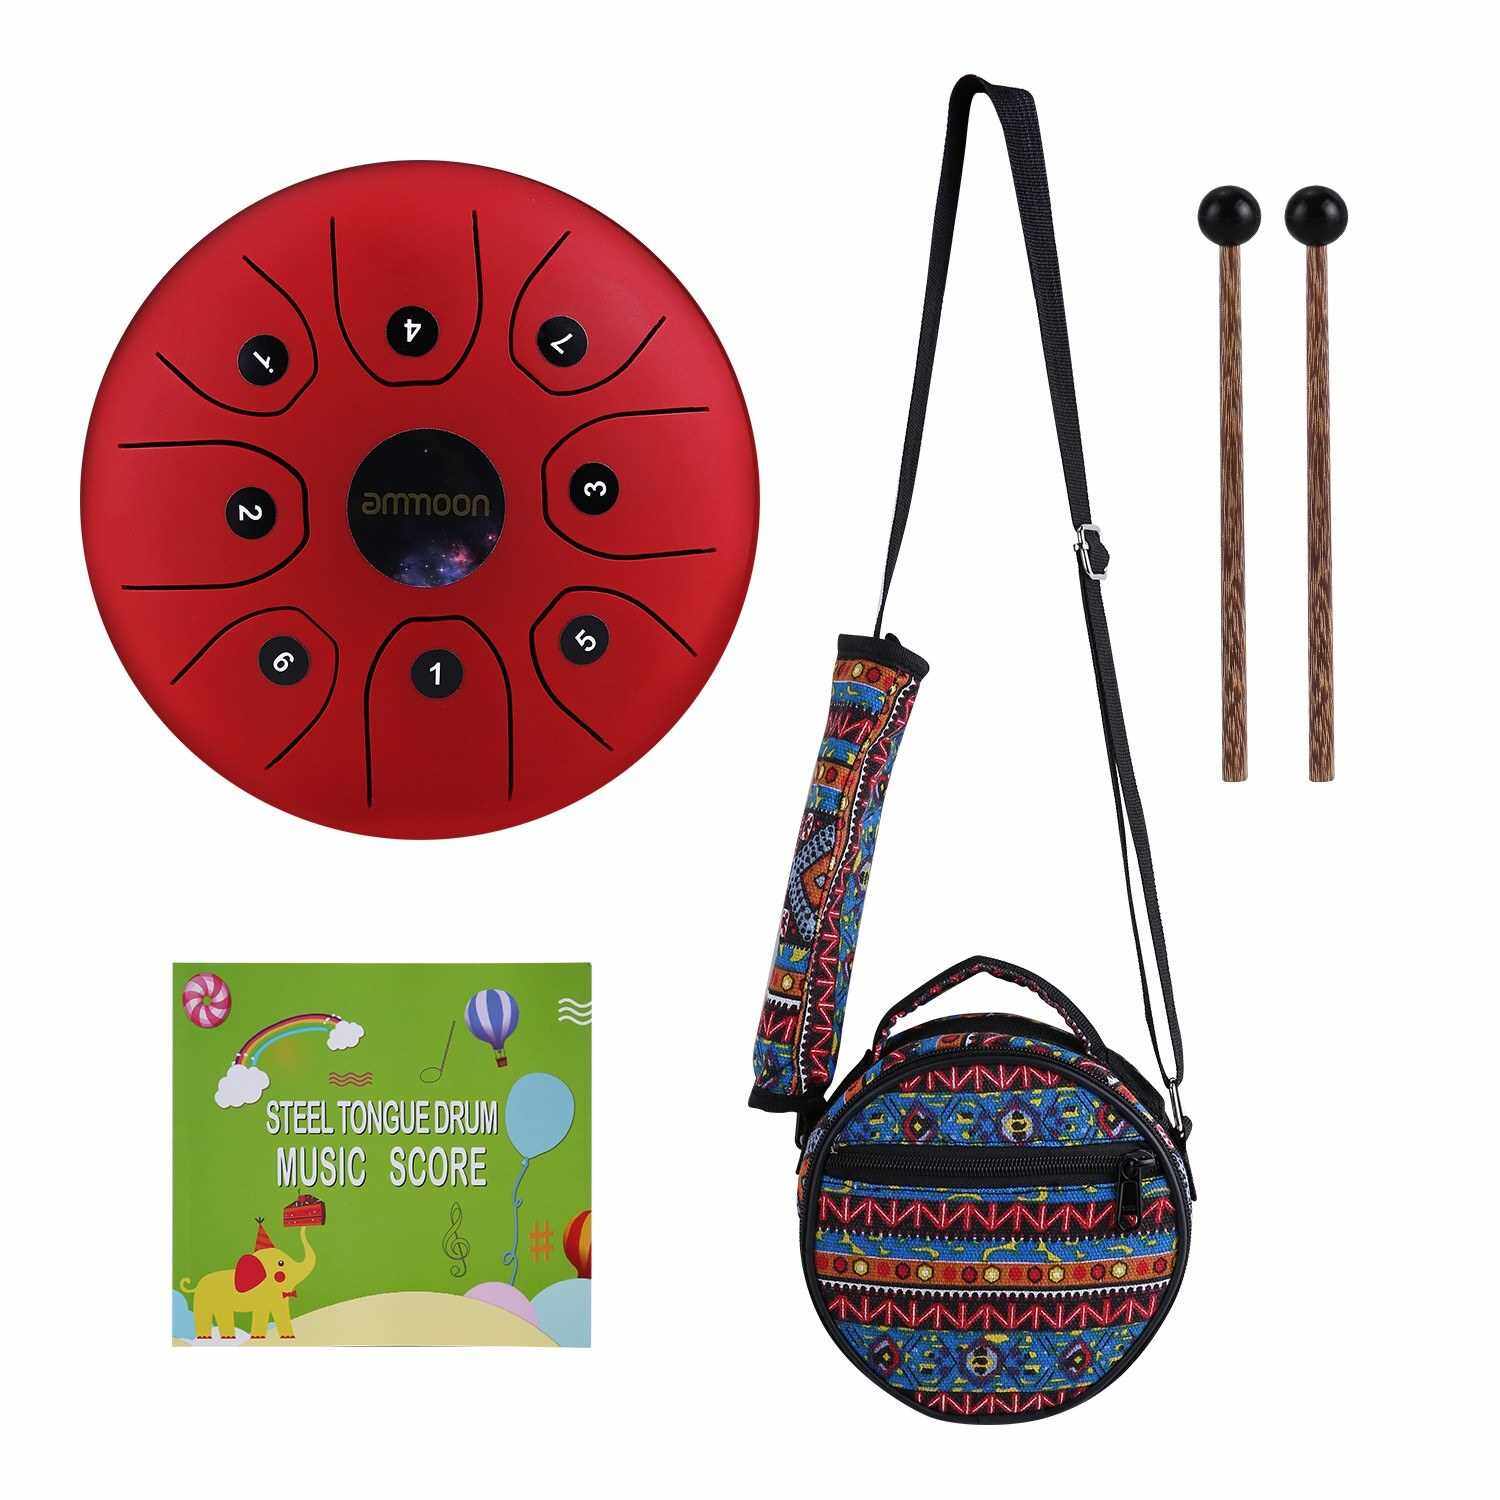 Best Selling ammoon 5.5 Inches Mini Steel Tongue Drum 8 Notes C-Key Handpan Drum Steel Pocket Drum Percussion Instrument with Mallets Carry Bag for Meditation Yoga Zazen Musical Education (Red)